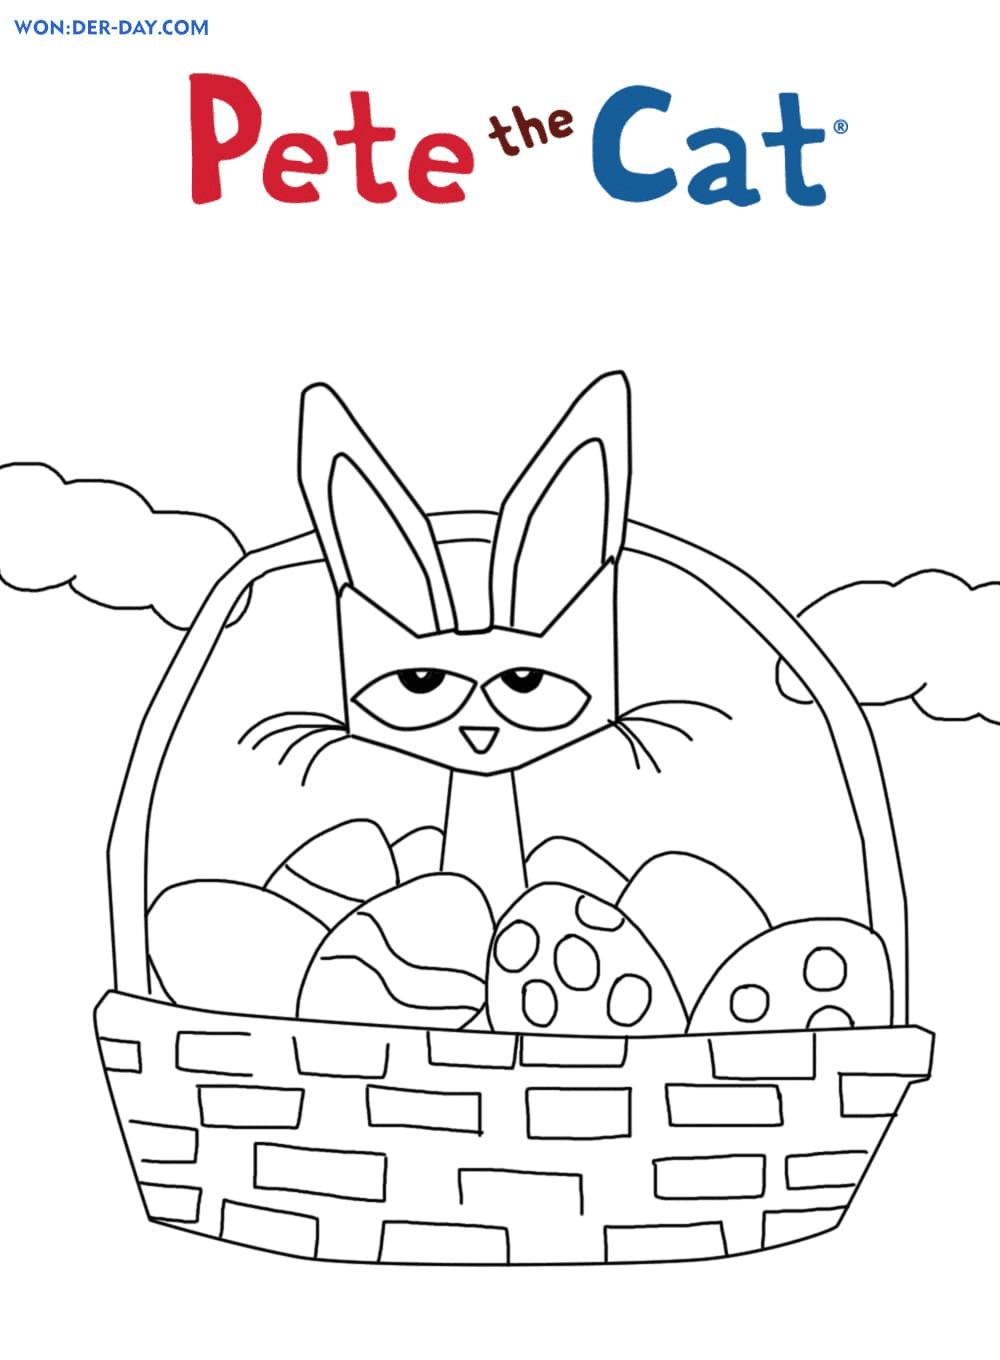 Pete the Cat Easter Coloring Page